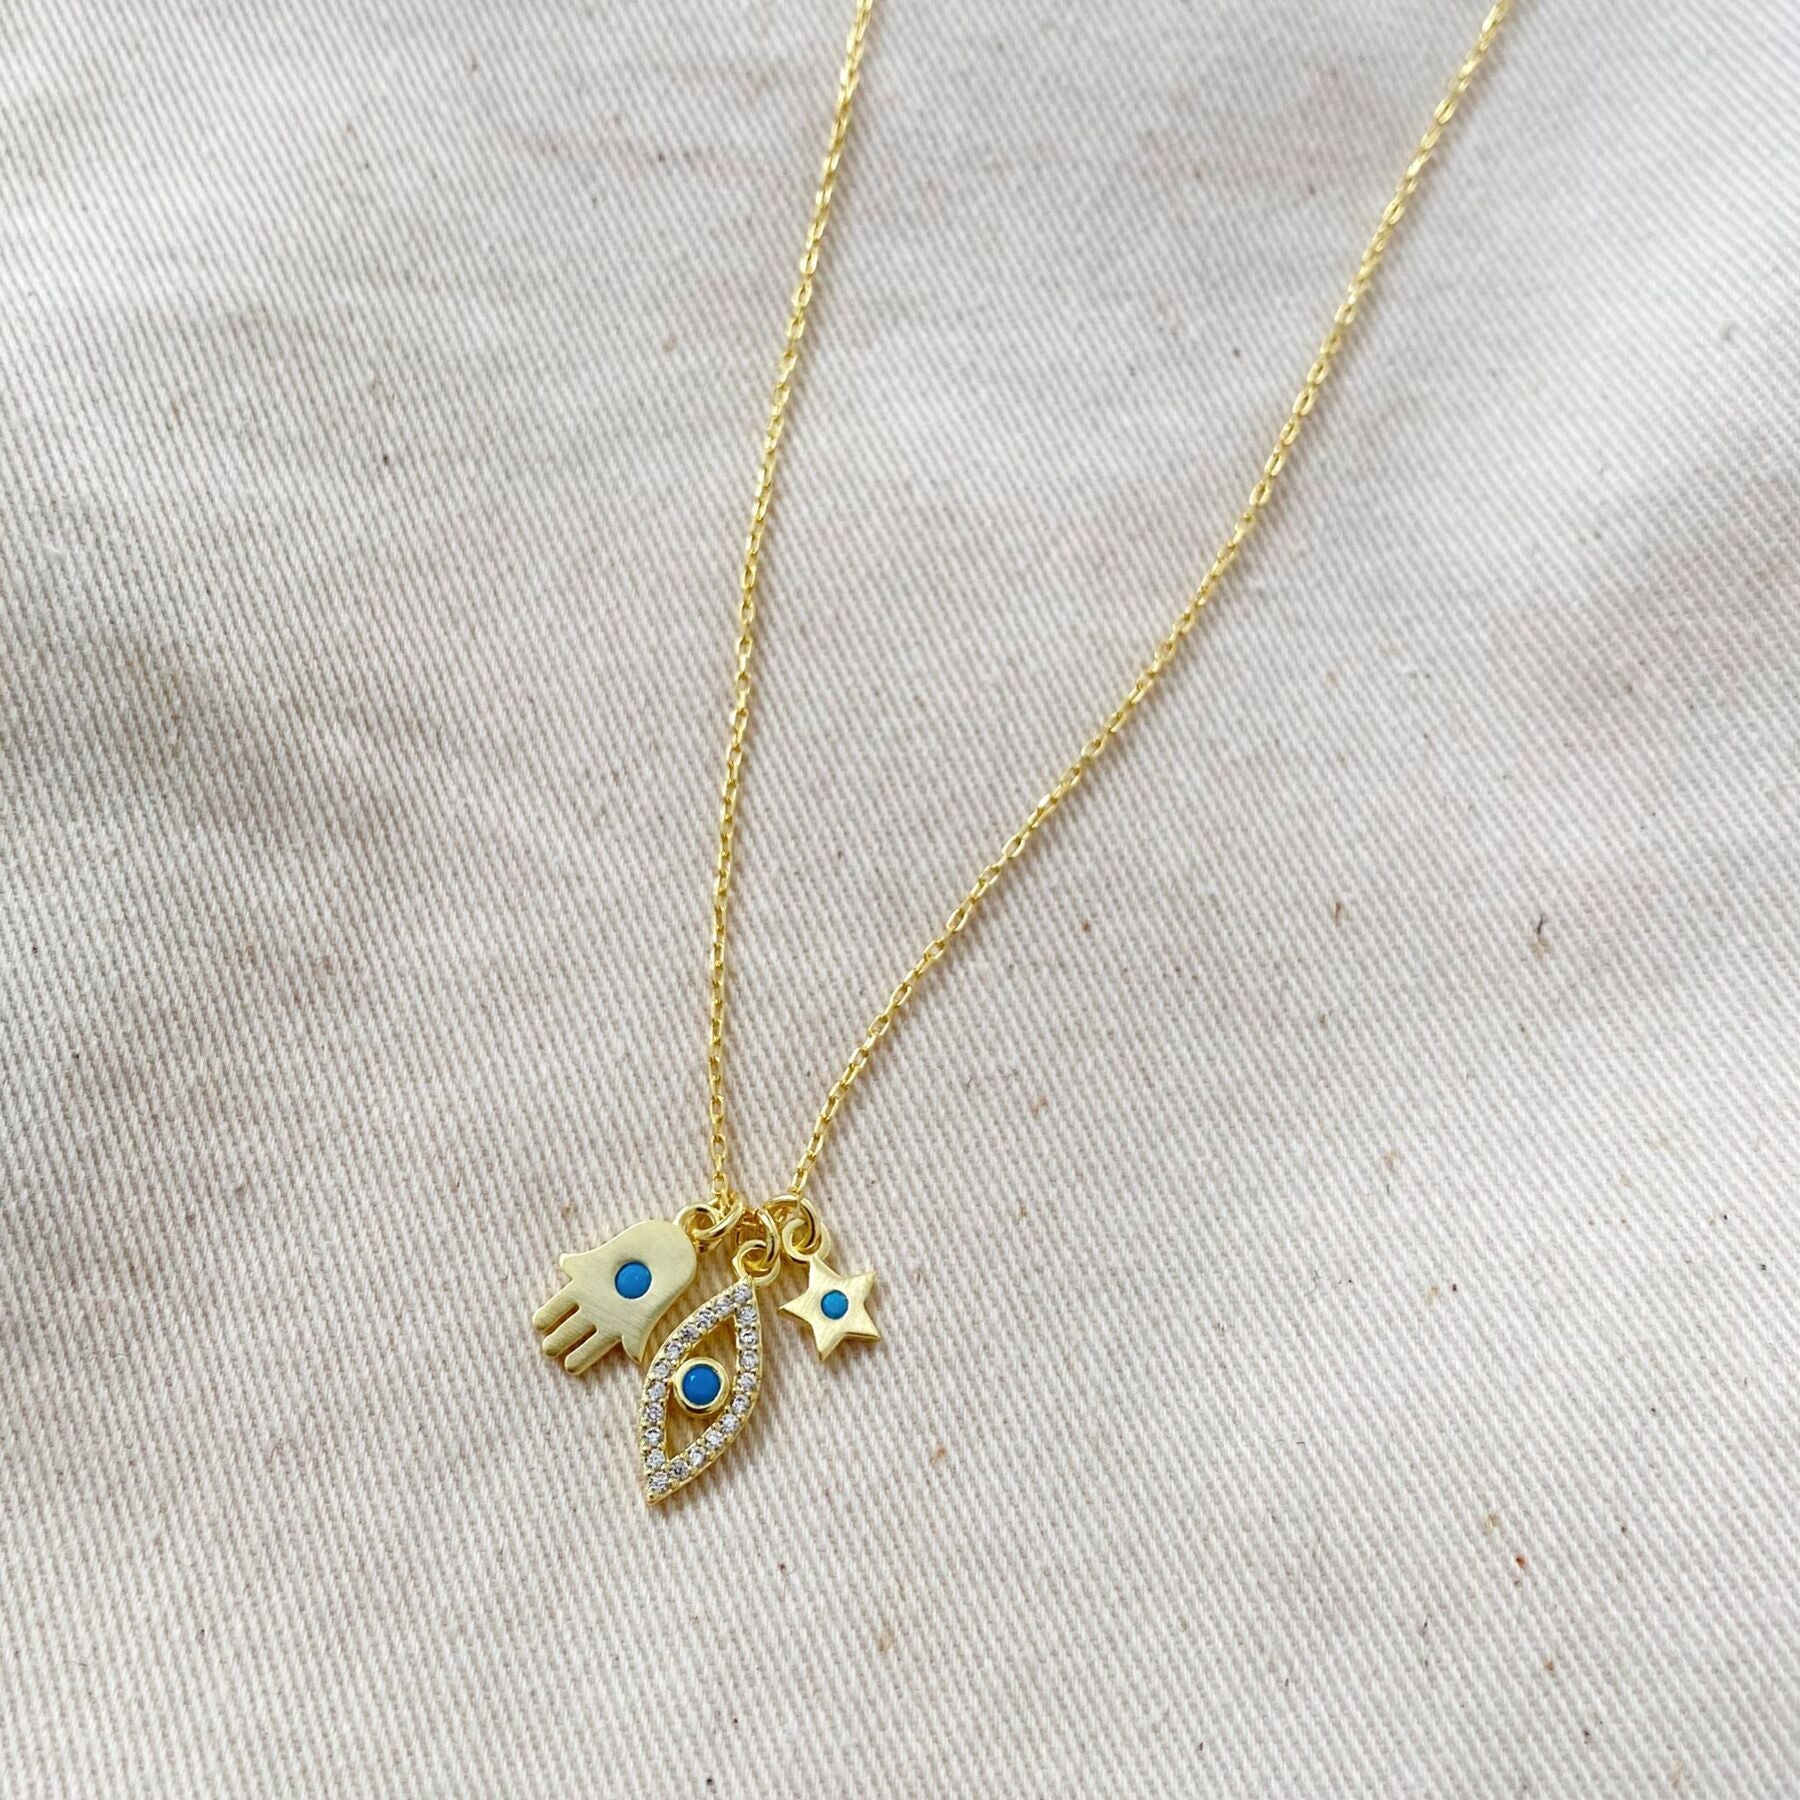 Hamsa Evil Eye Star Turquoise Sterling Silver Necklace